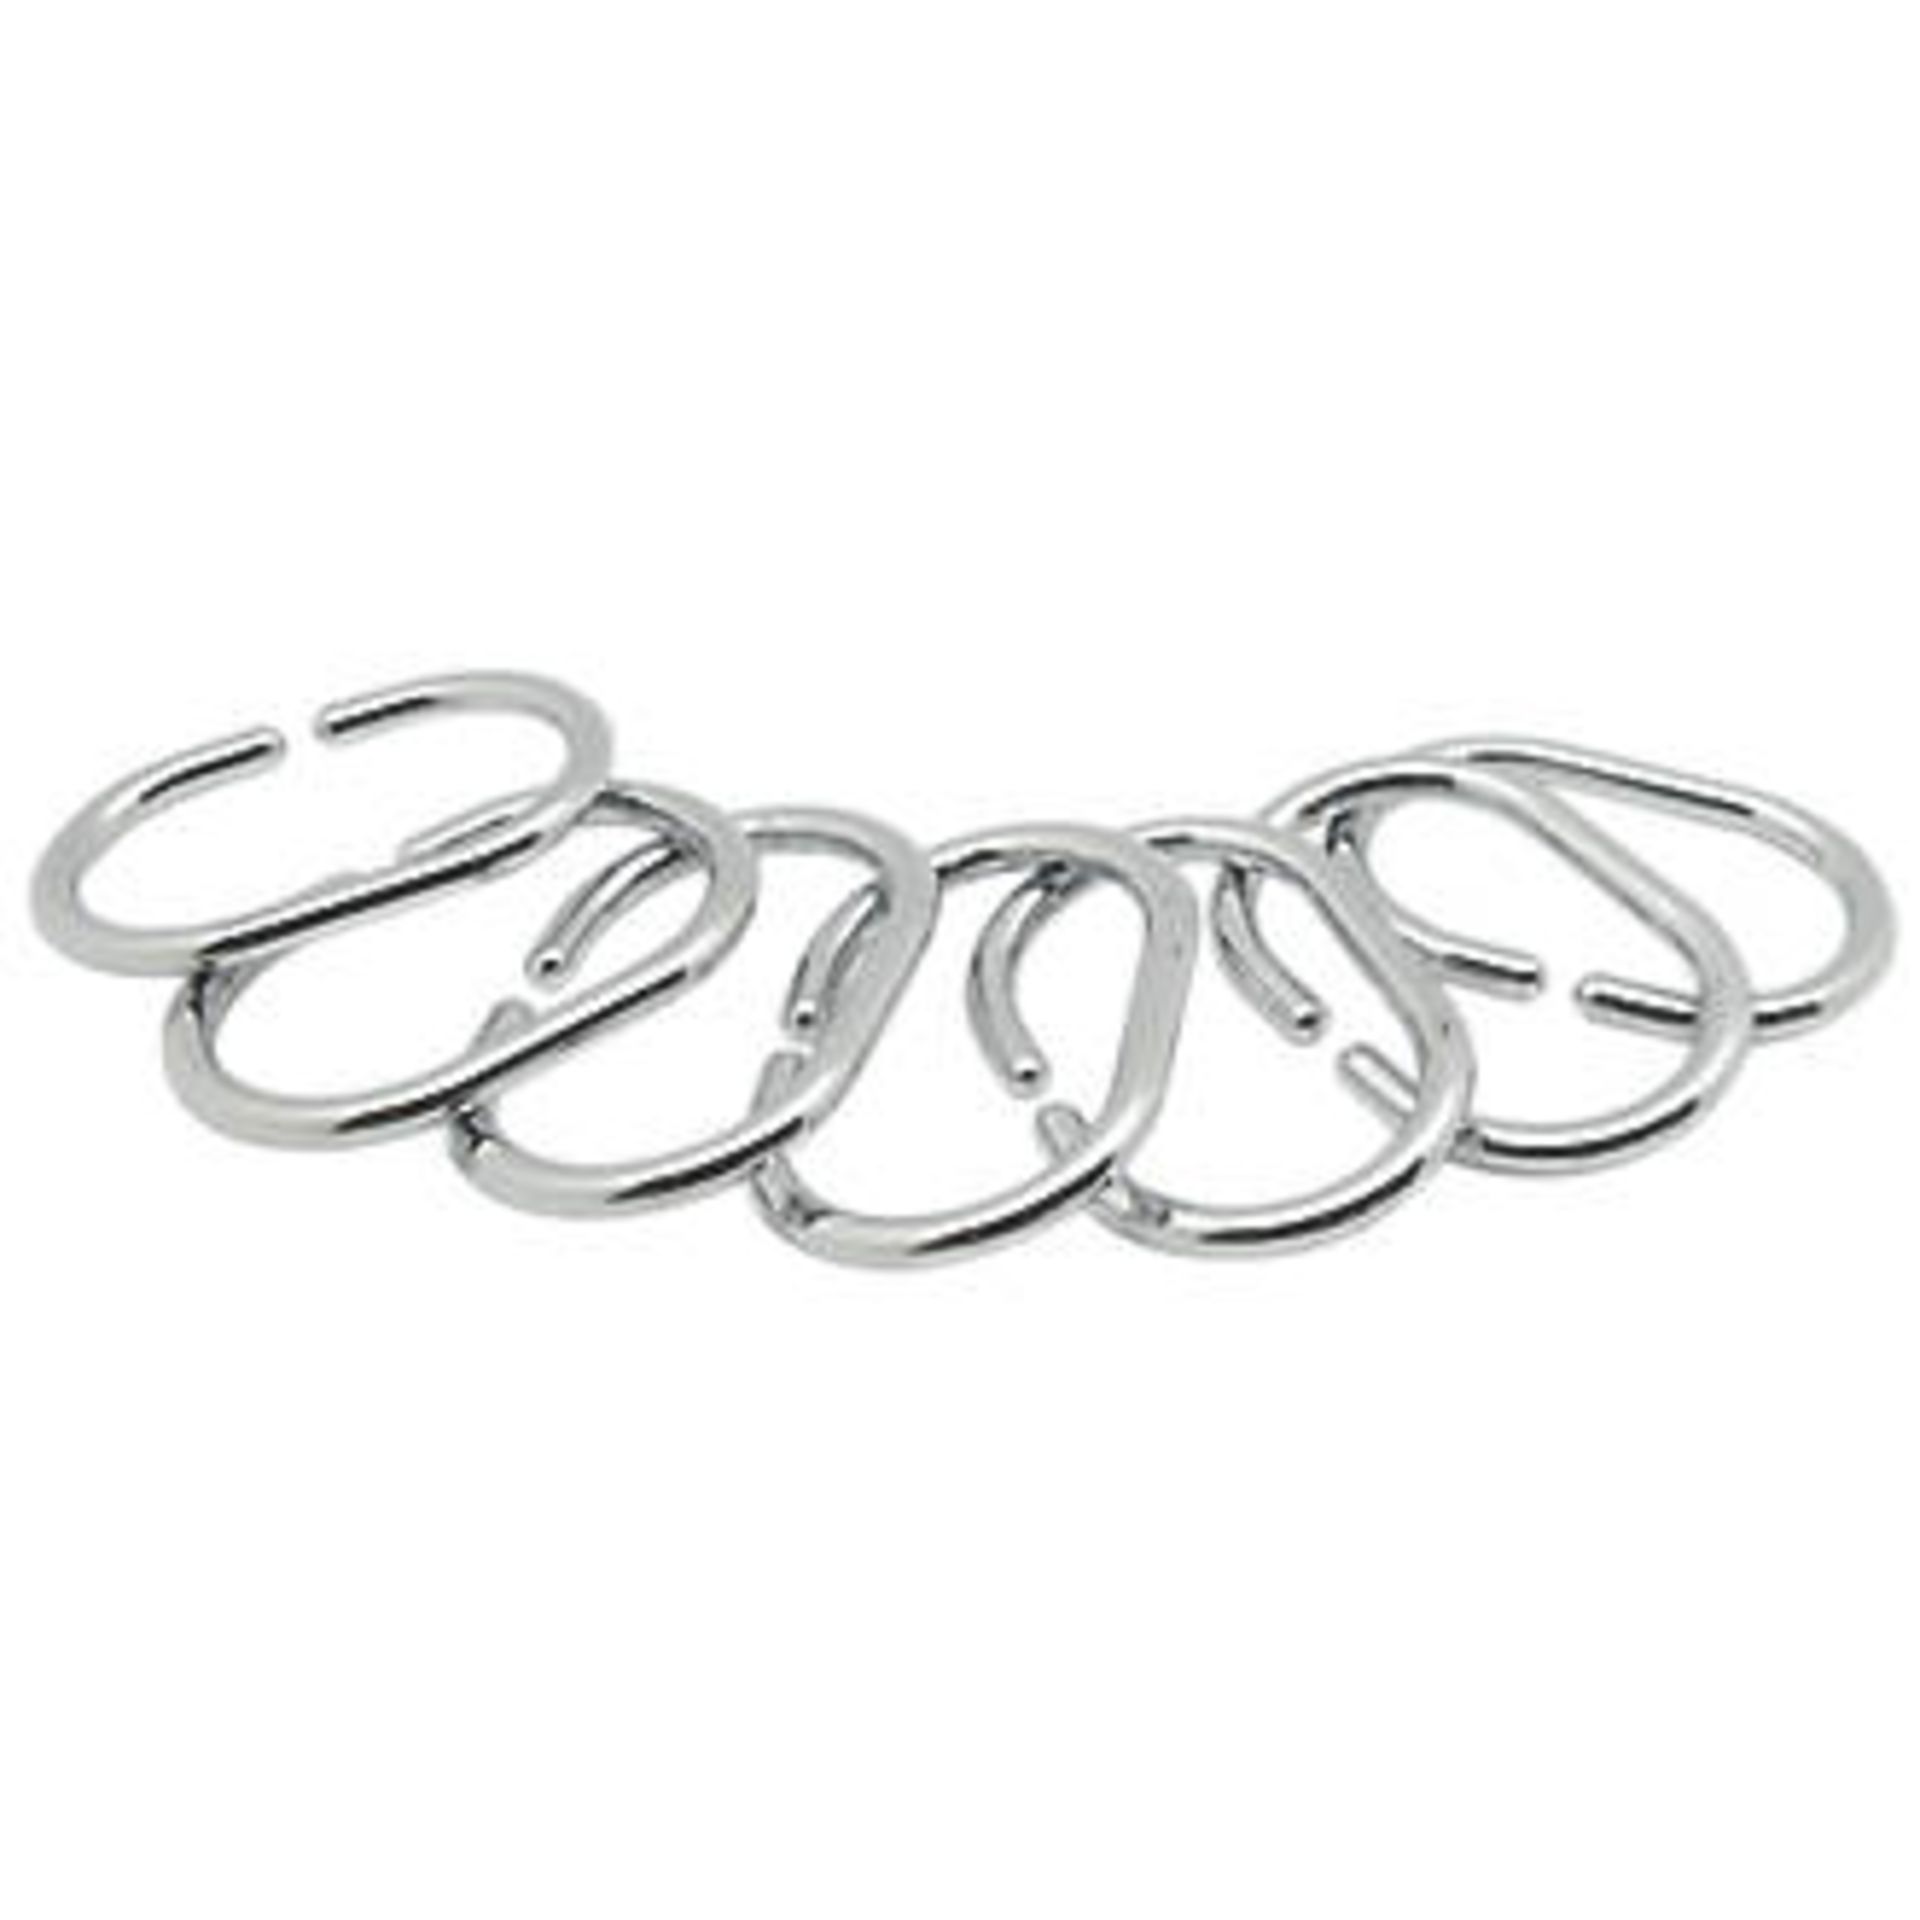 Cooke & Lewis Shower Curtain Rings - 12 Pack - Chrome